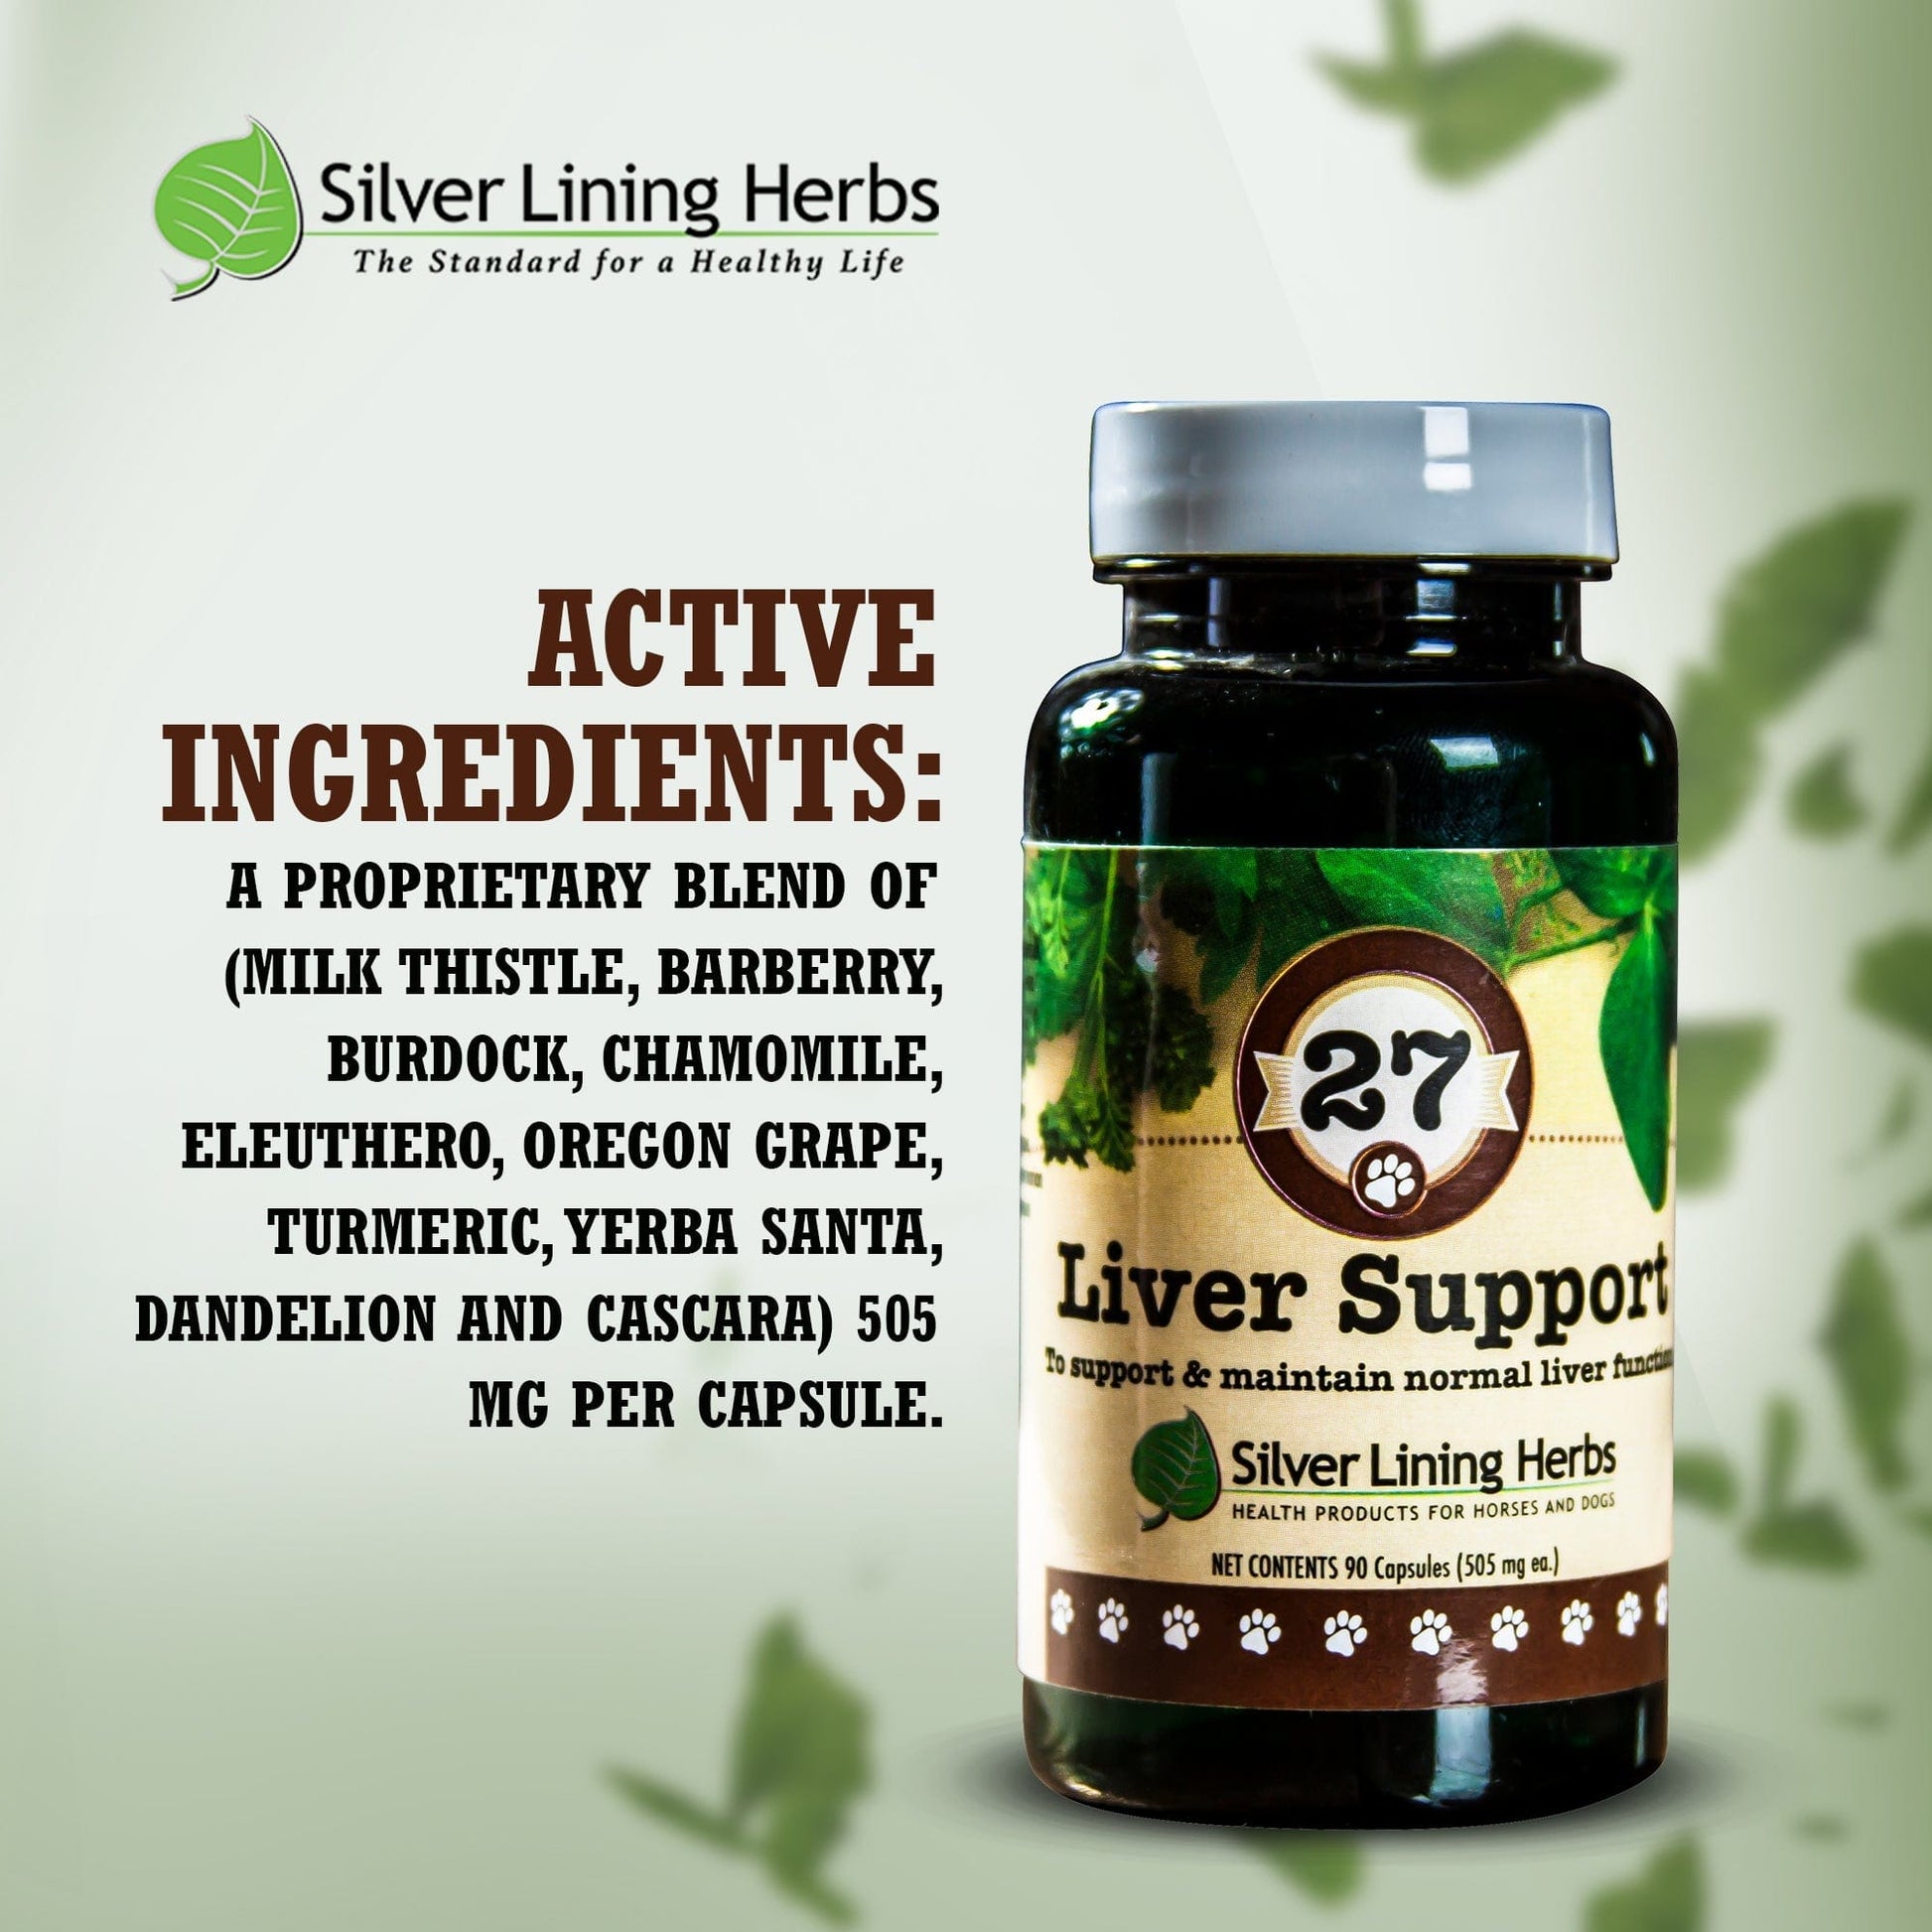 A bottle of #27 Liver Support for Dogs with a list of its active ingredients